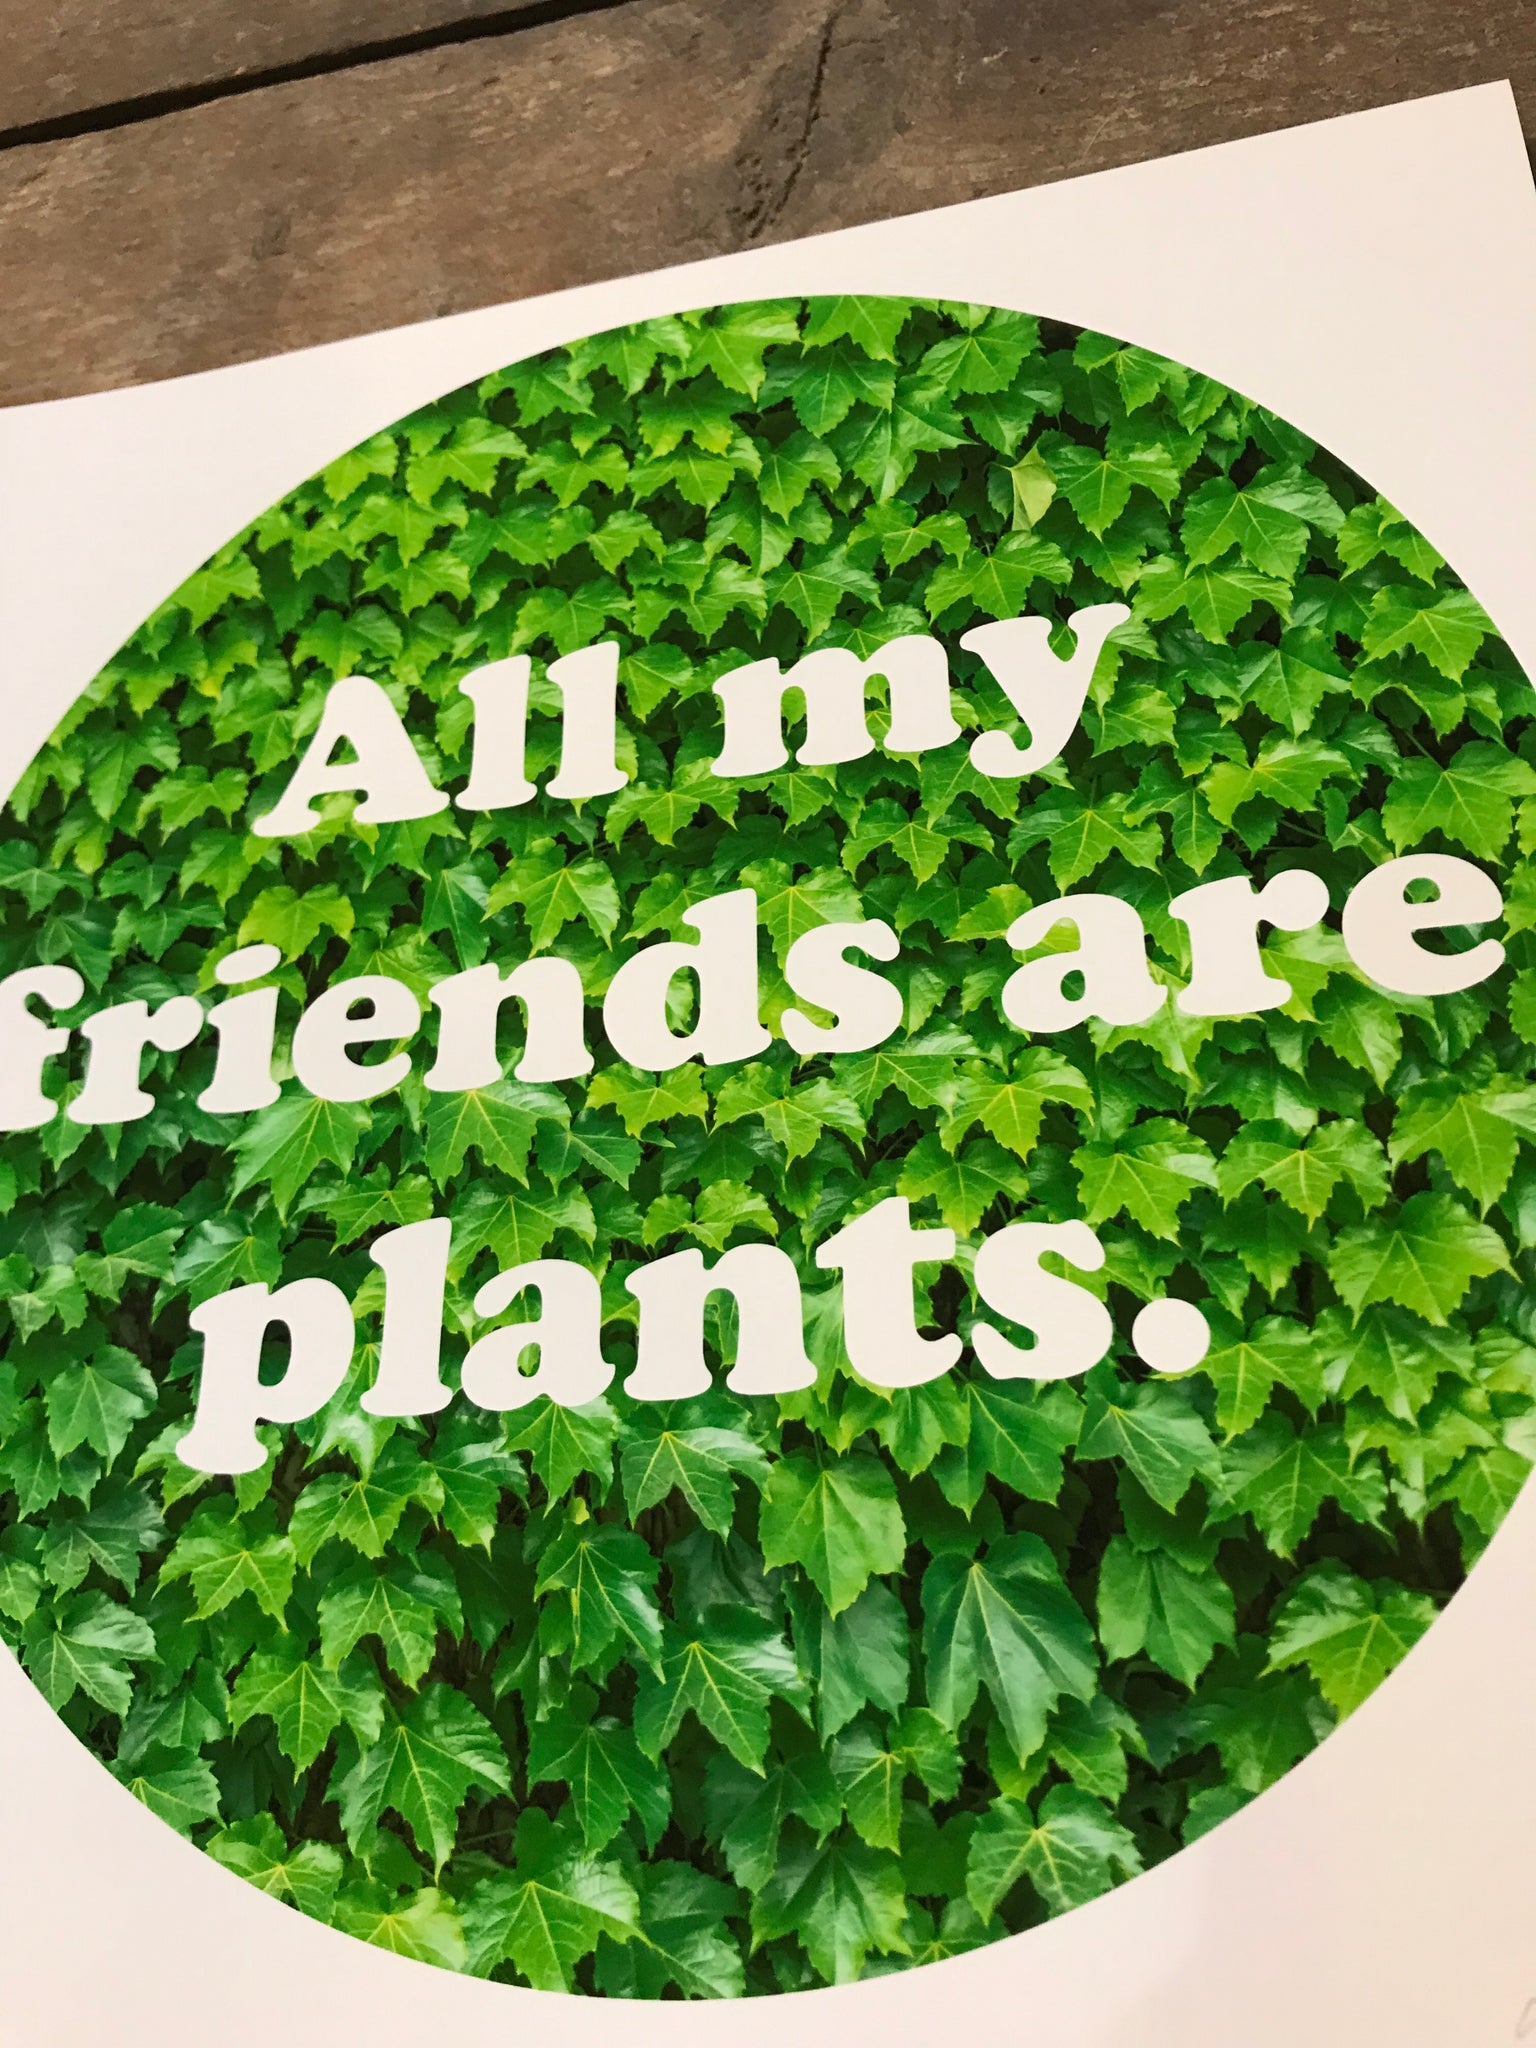 All My Friends Are Plants 8” by 8” Giclee Print by Kris Johnsen